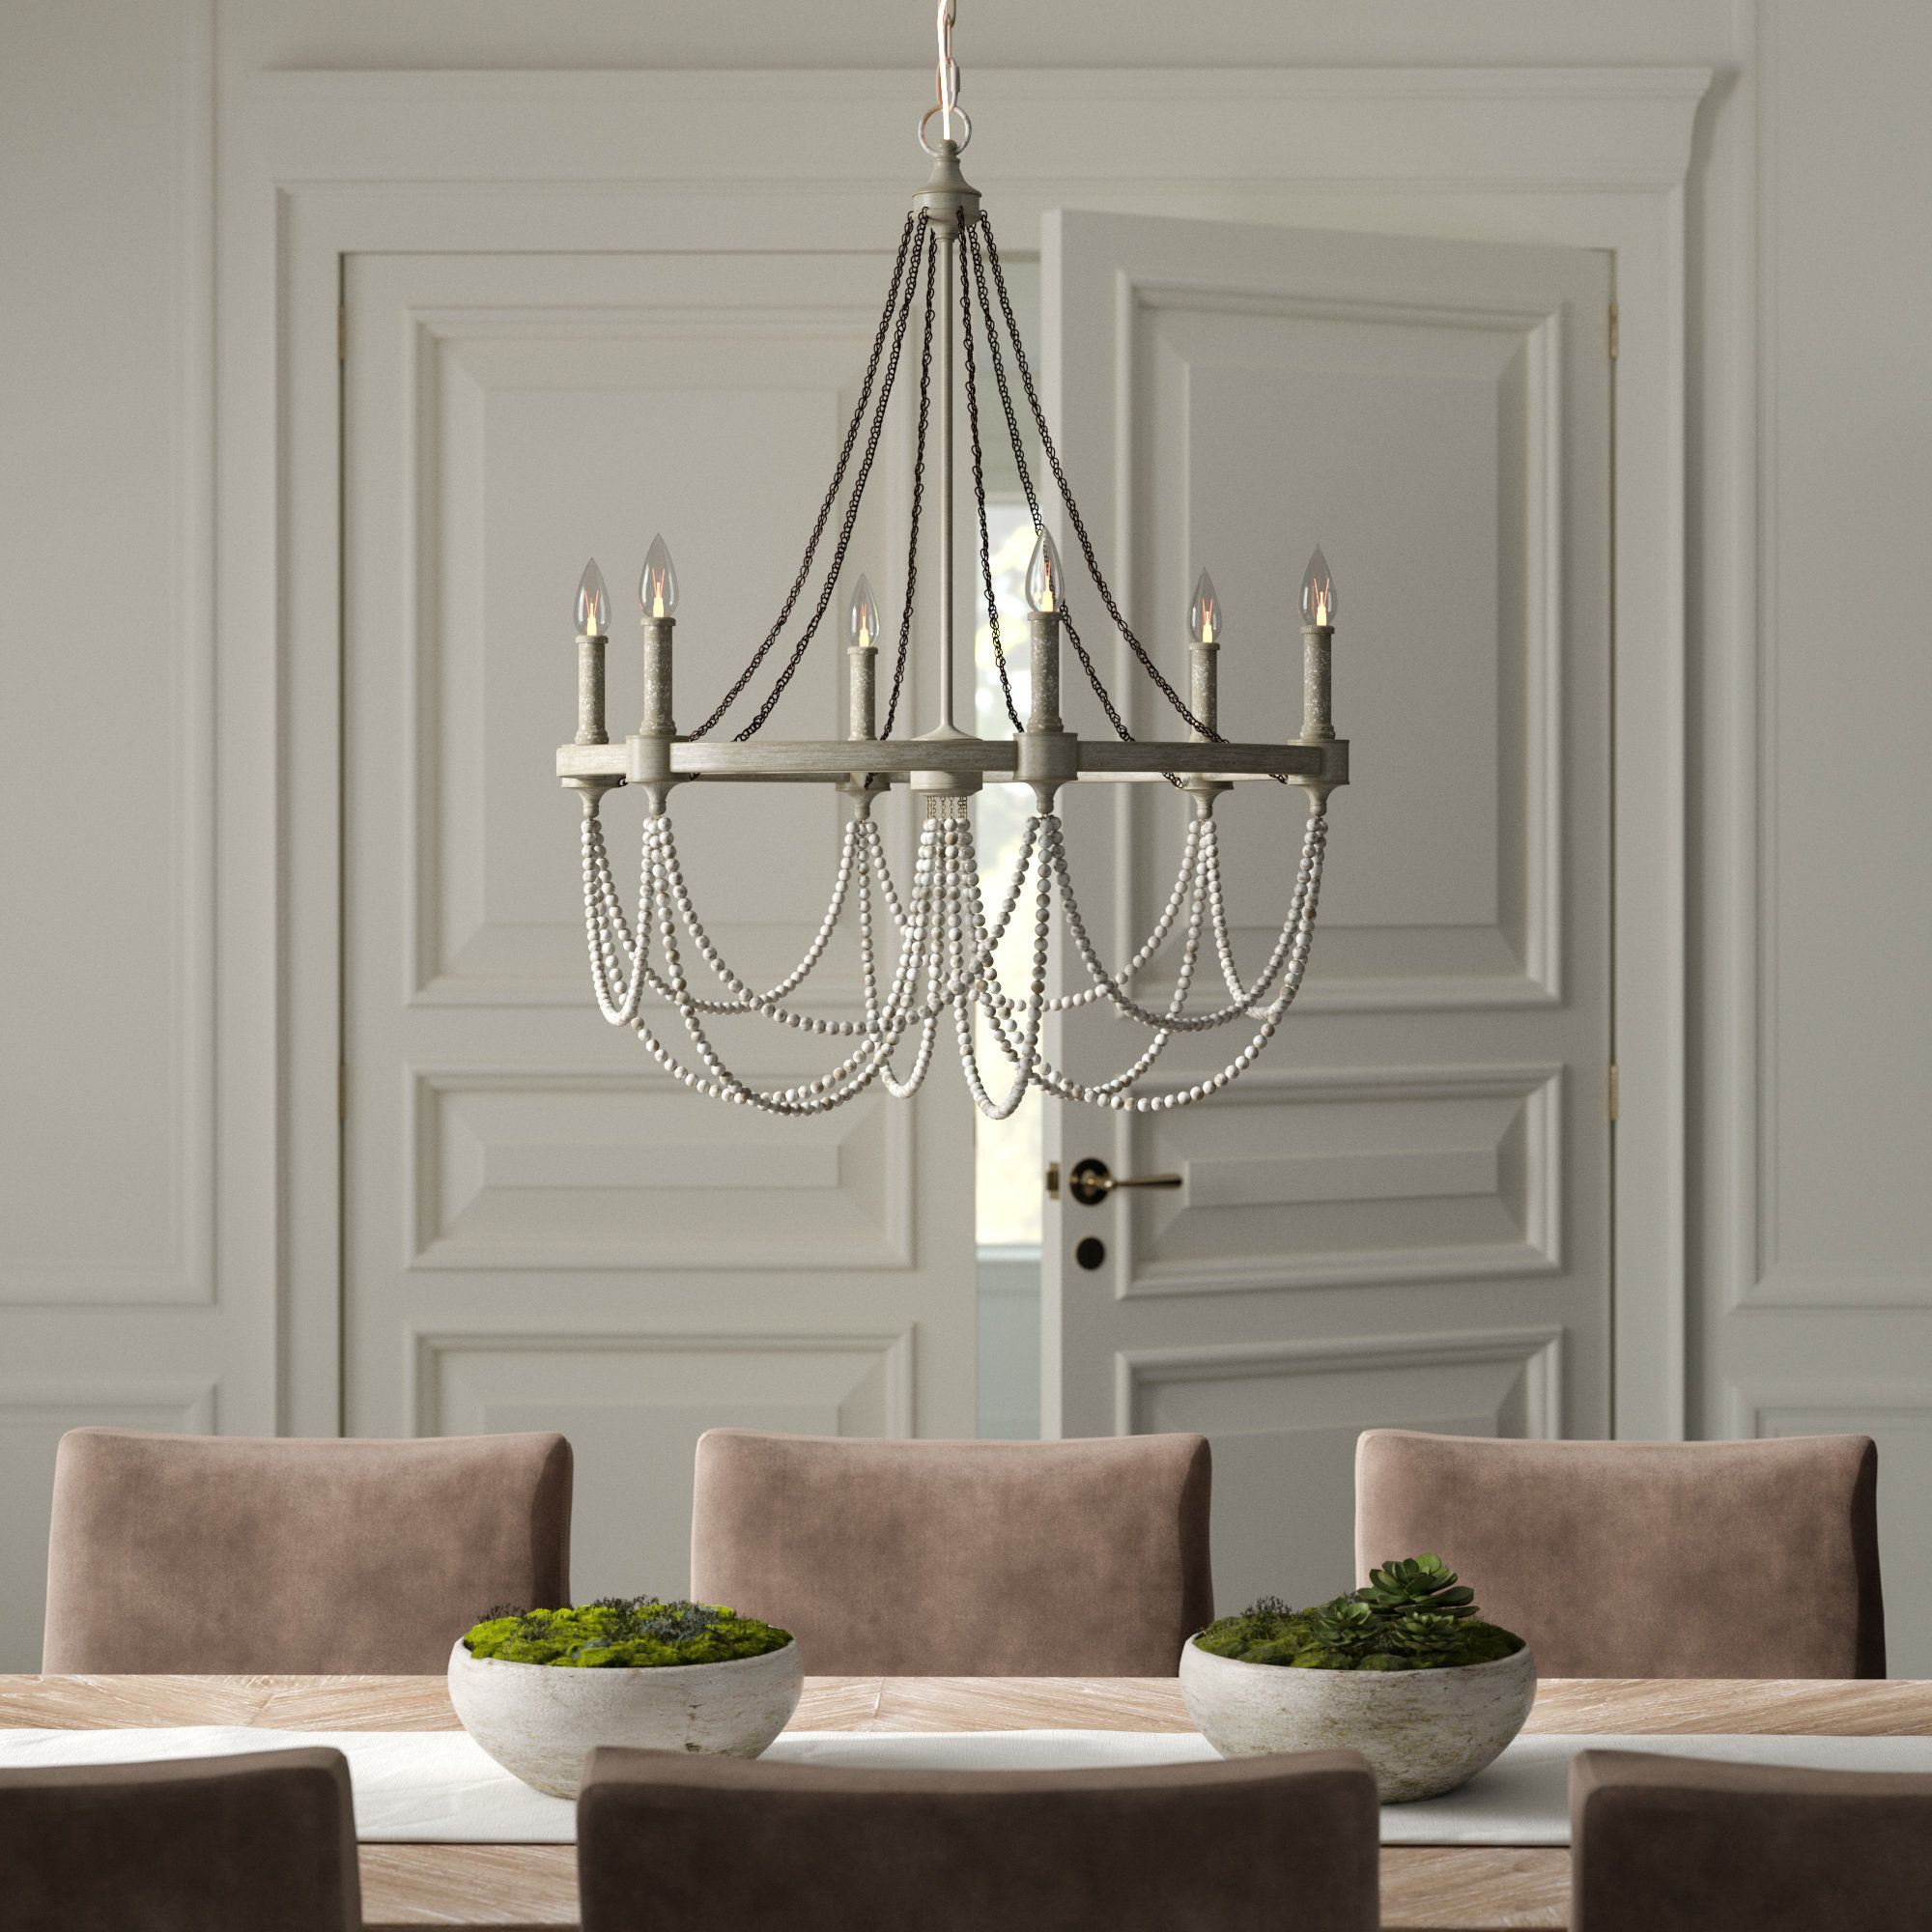 Latest Watford 6 Light Candle Style Chandeliers With Regard To Fitzgibbon 6 Light Candle Style Chandelier (View 7 of 25)